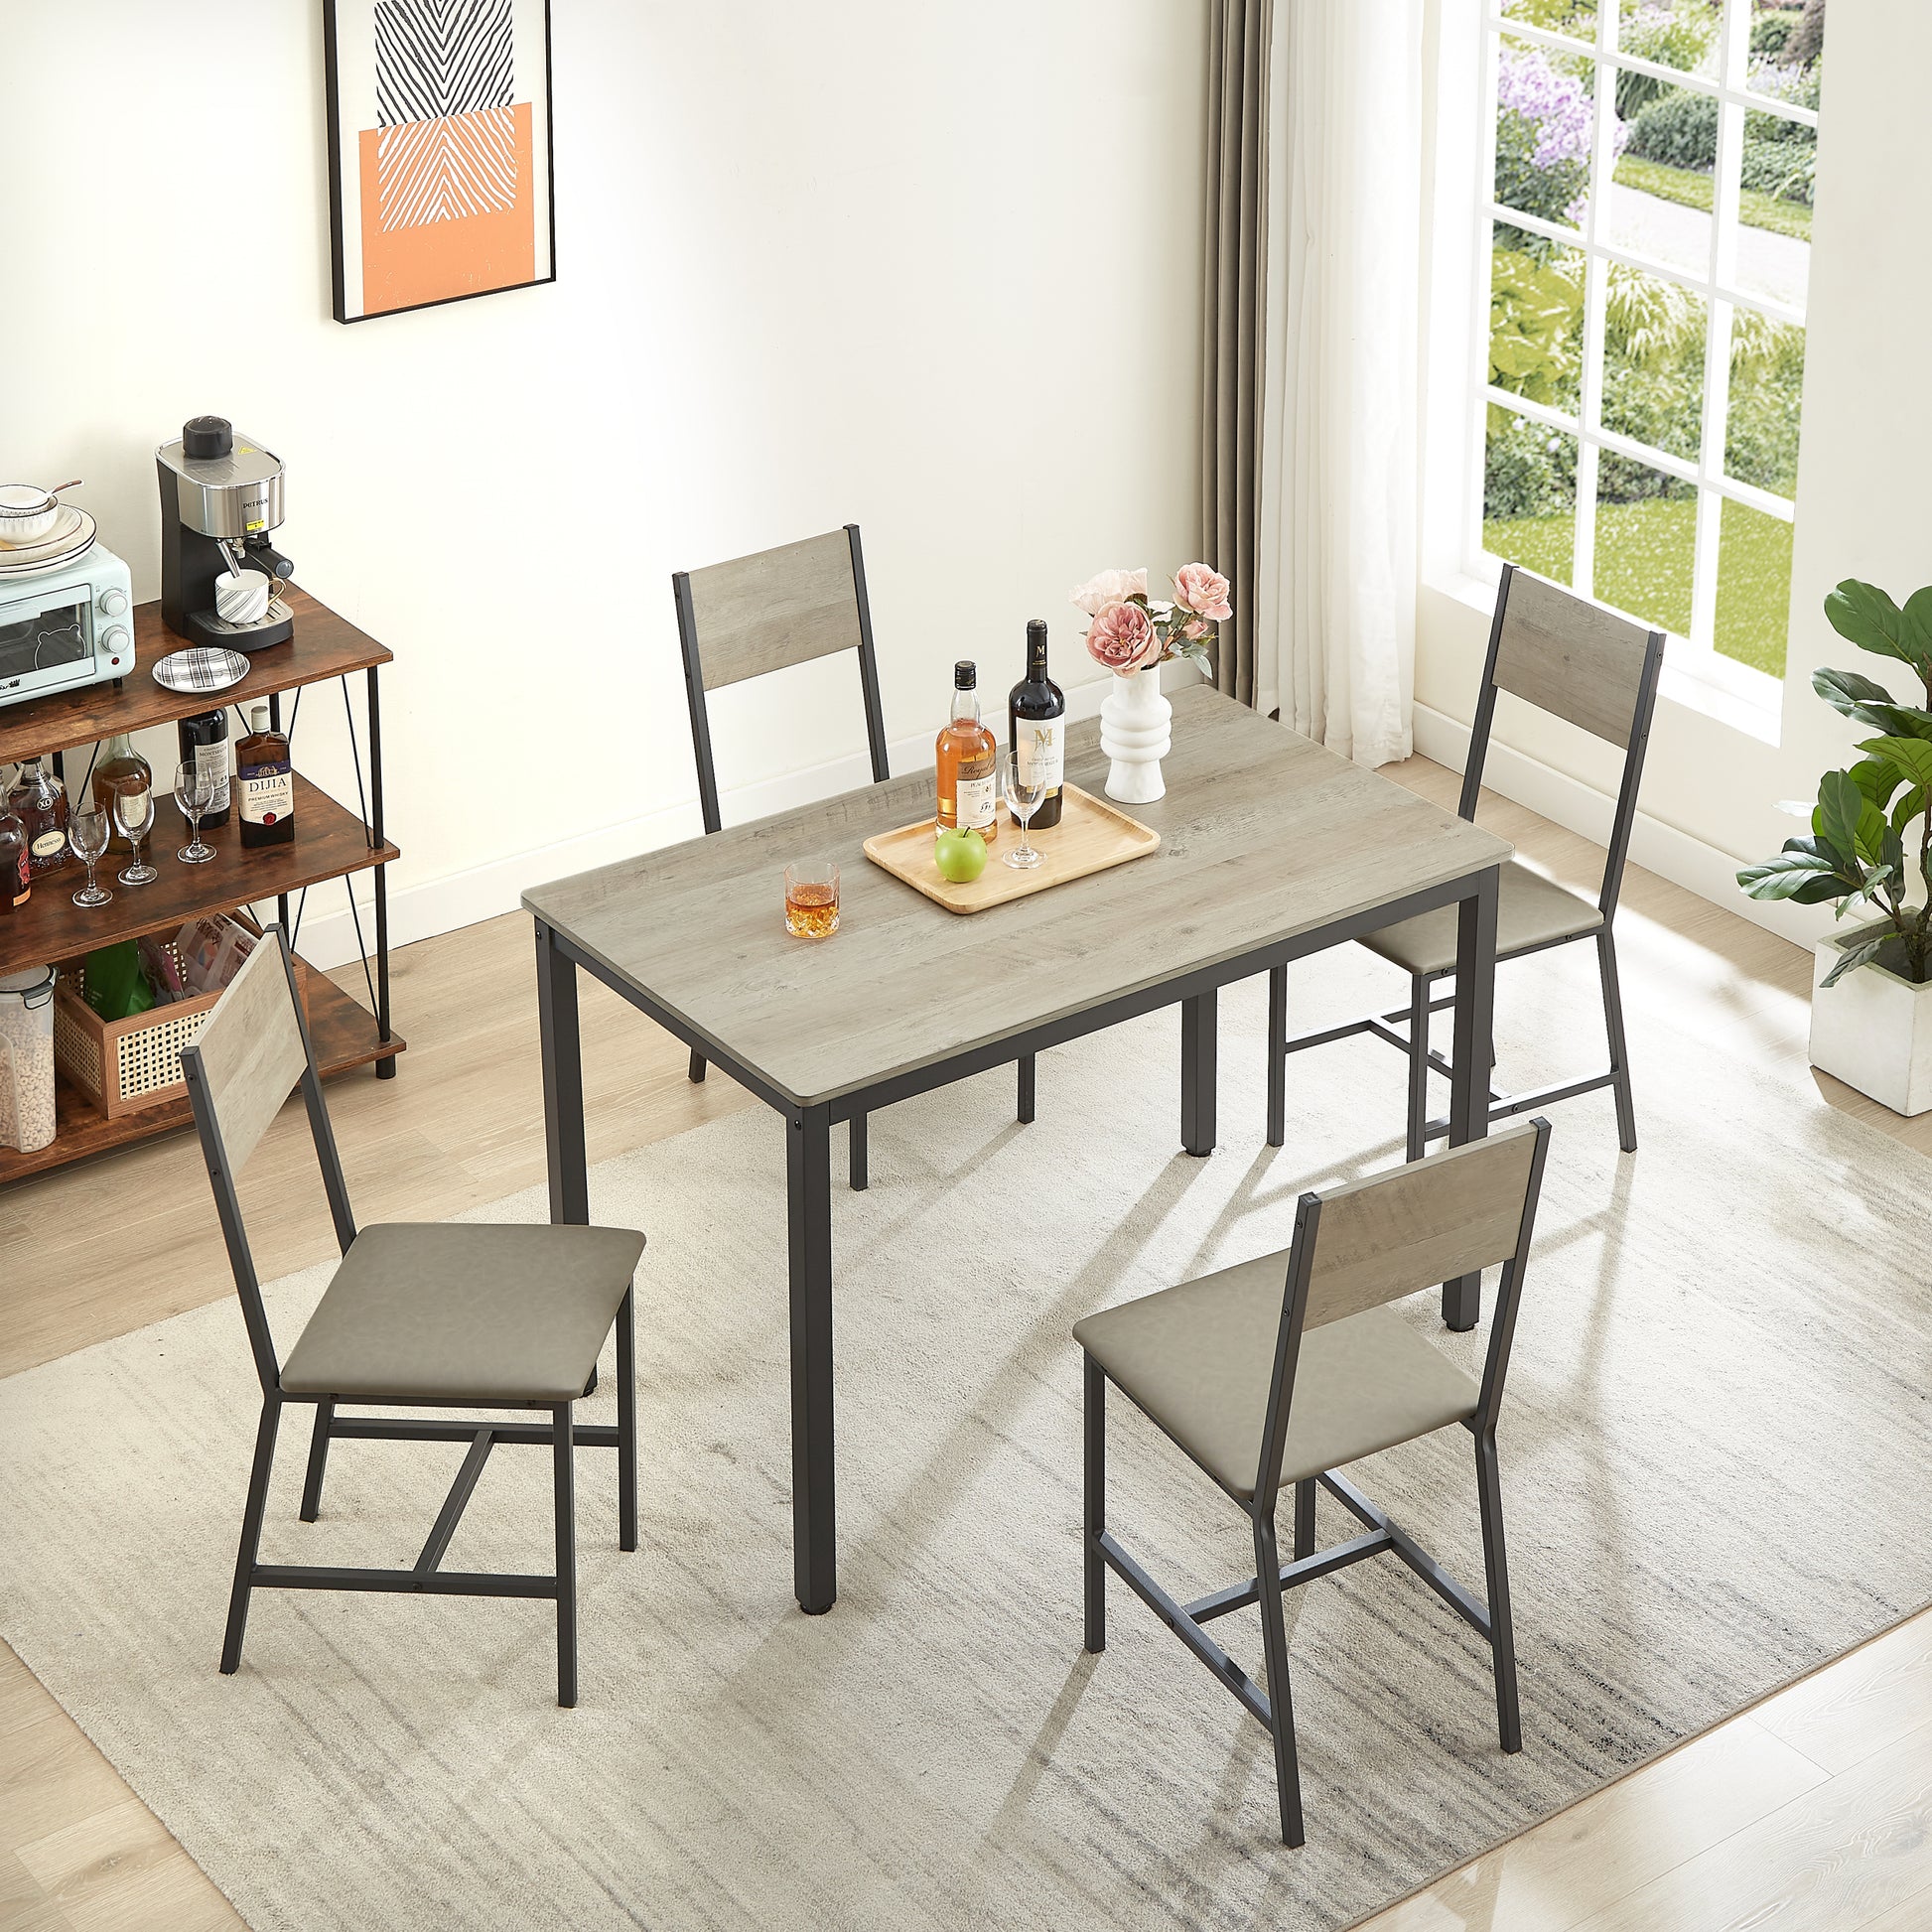 Dining Set for 5 Kitchen Table with 4 Upholstered Chairs, Grey, 47.2'' L x 27.6'' W x 29.7'' H. - Enova Luxe Home Store